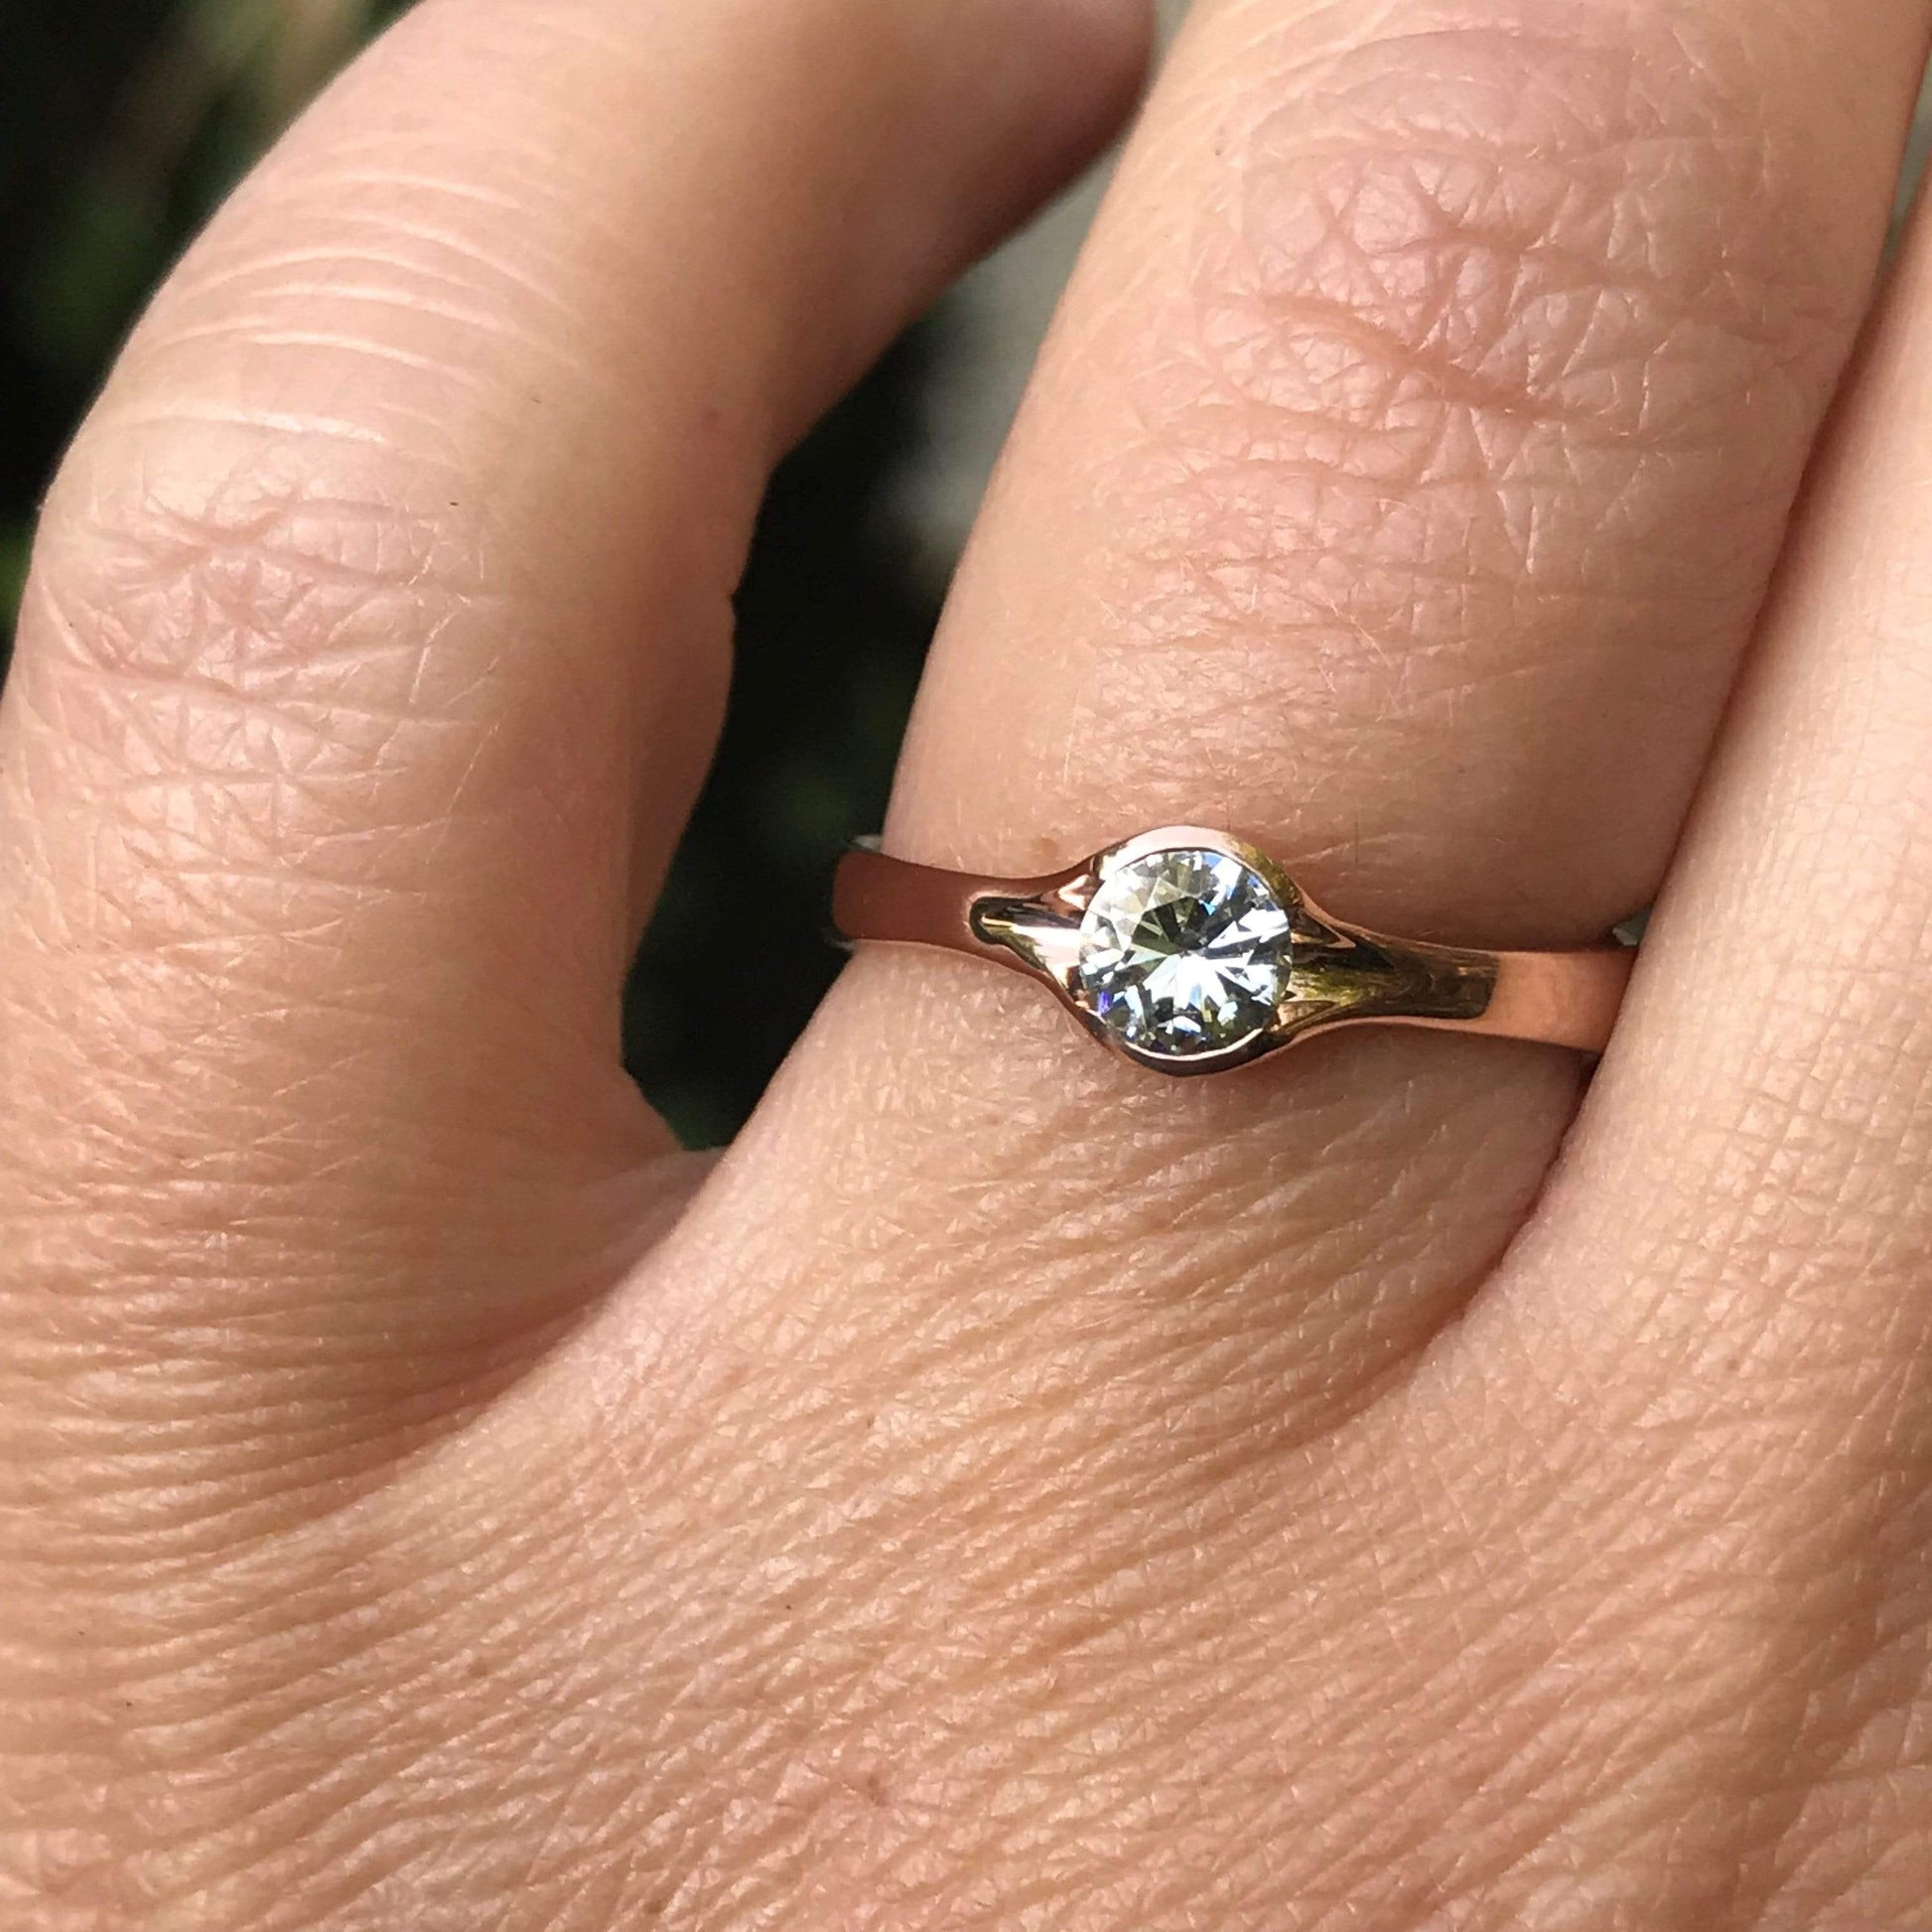 Round Light Gray Moissanite Half Bezel Fold Solitaire Rose Gold Engagement Ring, Ready to Ship 14k Rose Gold Ring Ready To Ship by Nodeform